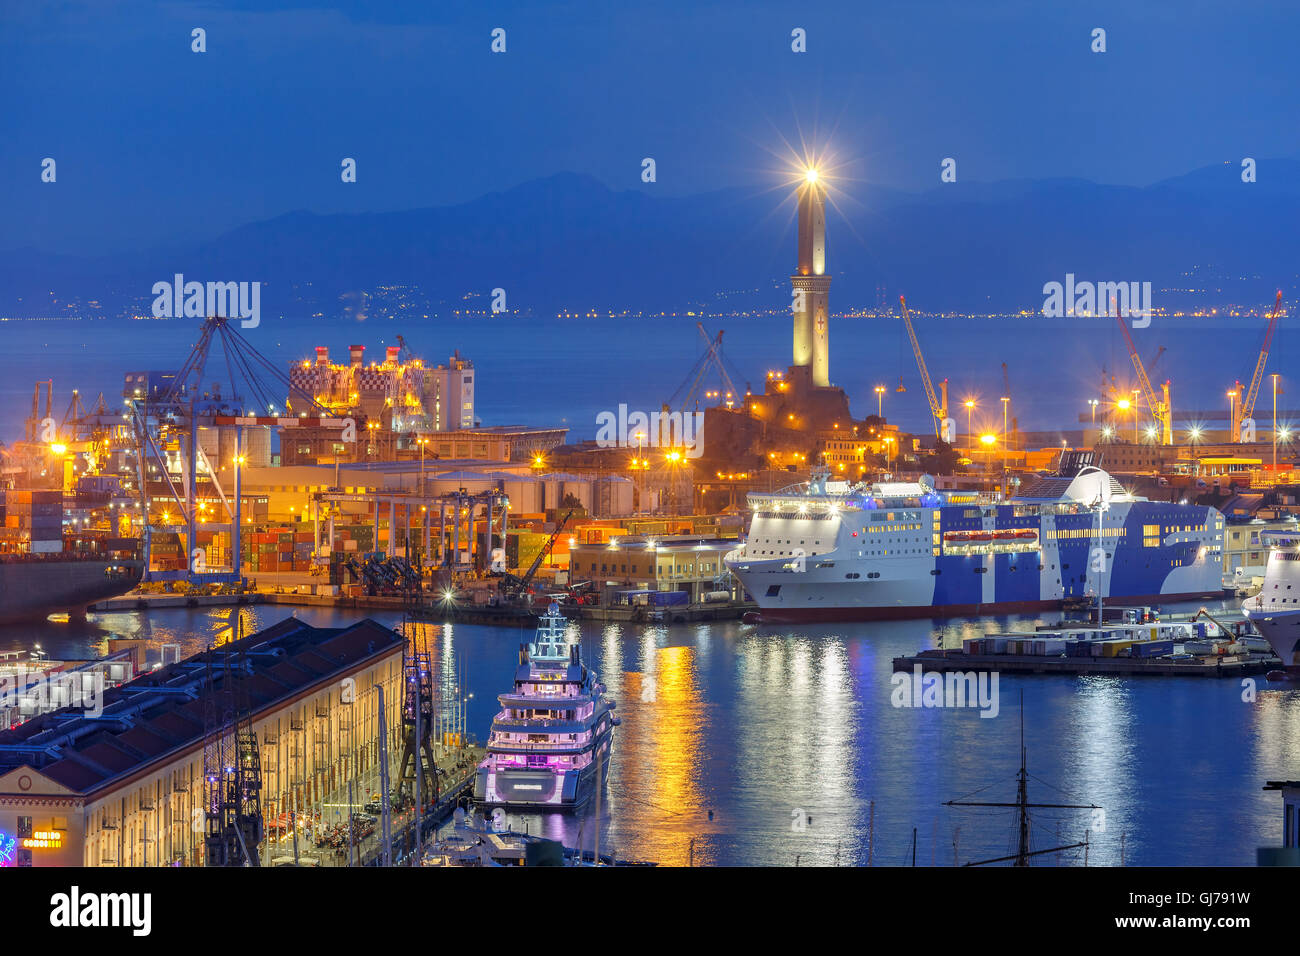 Old Lighthouse in port of Genoa at night, Italy. Stock Photo